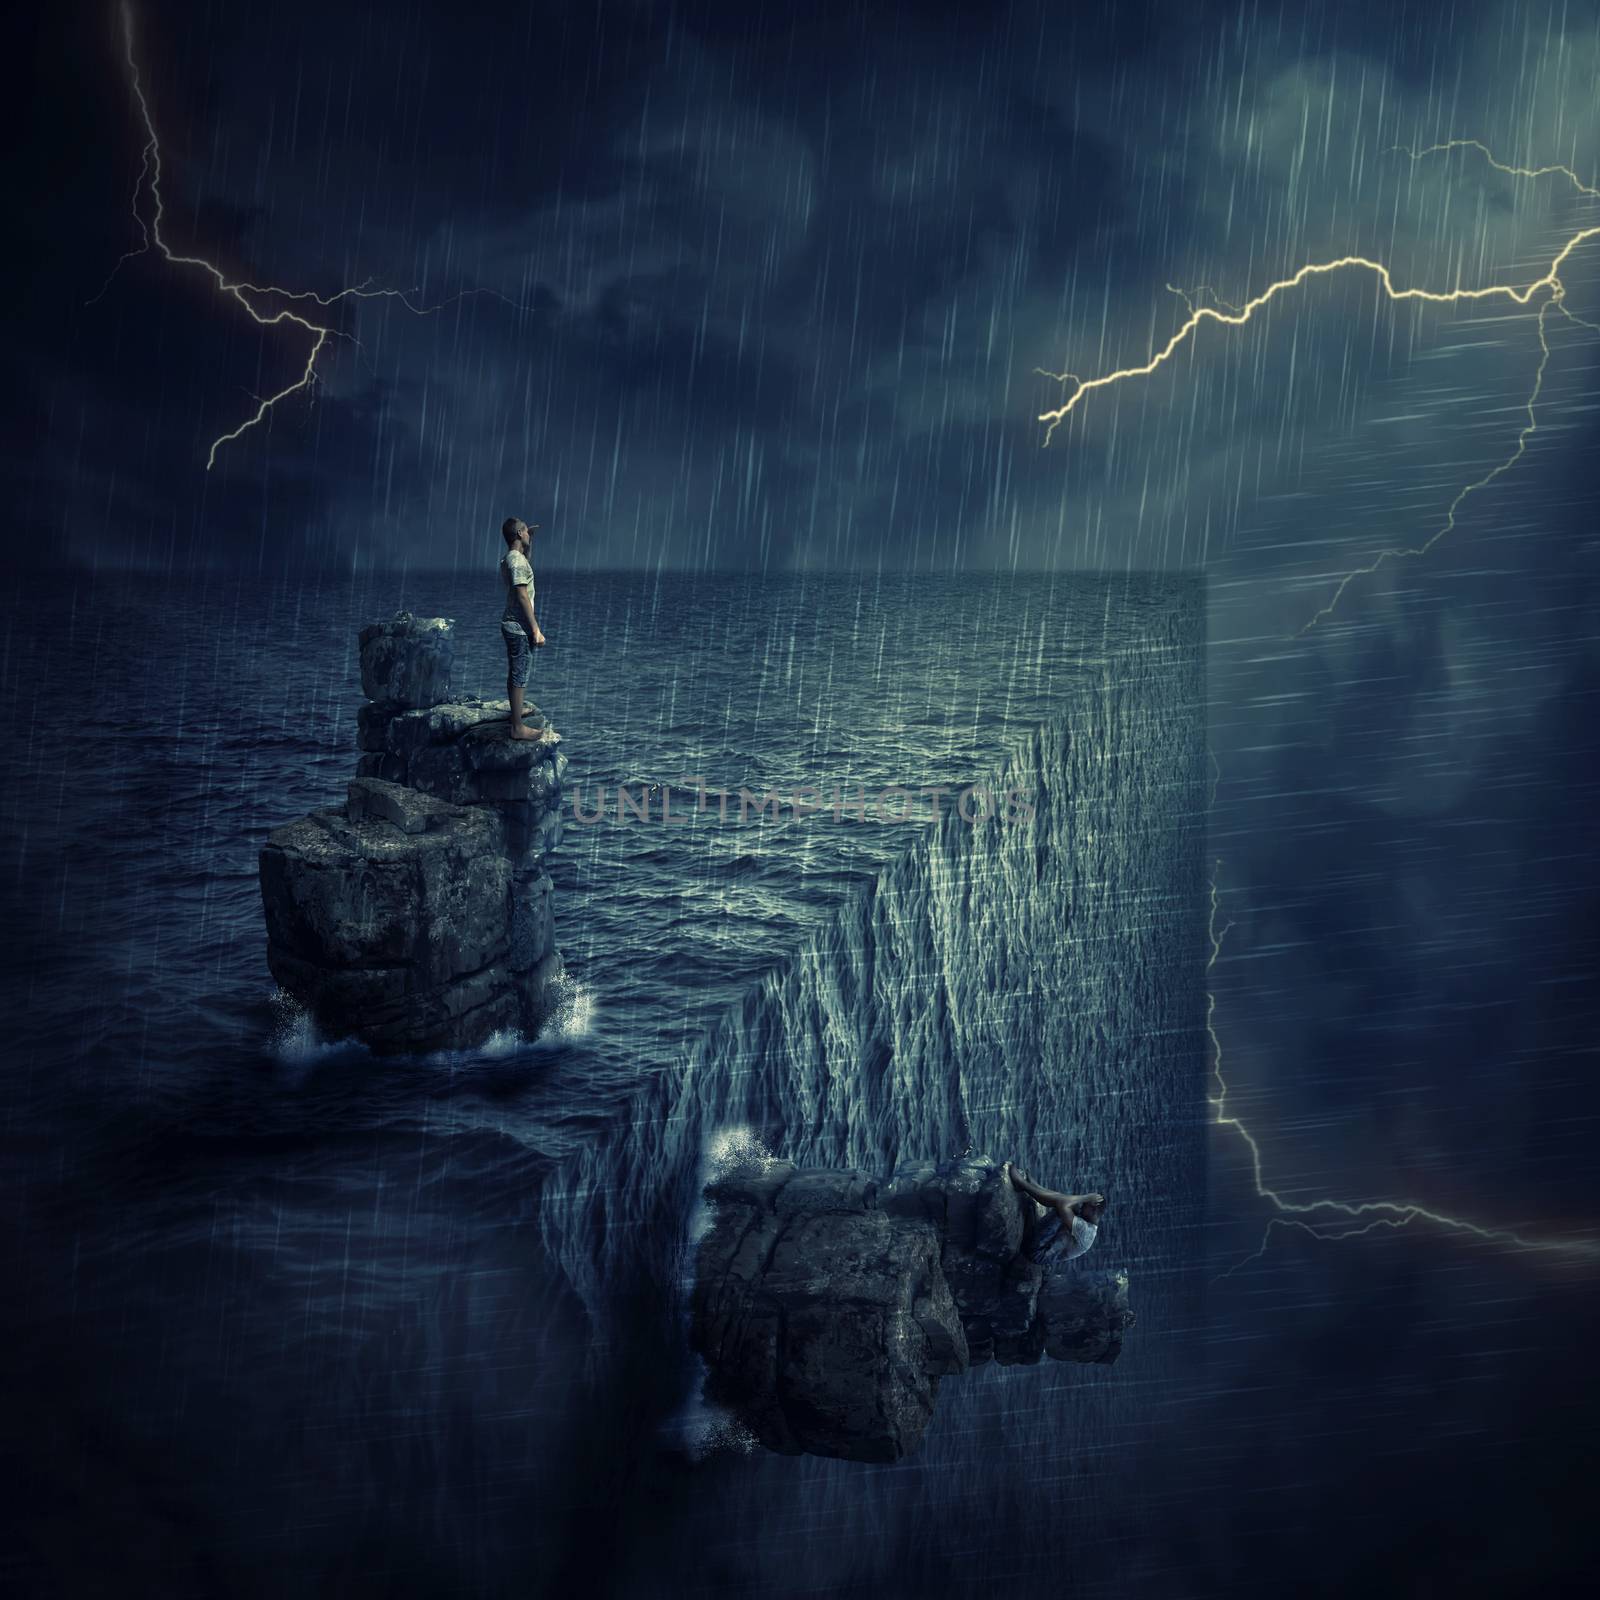 Conceptual image with a lost man sitting on a rock cliff island, in the middle of the ocean, trying to find himself in a parallel world, alternate reality. Parallel universe, multiverse fiction theory.